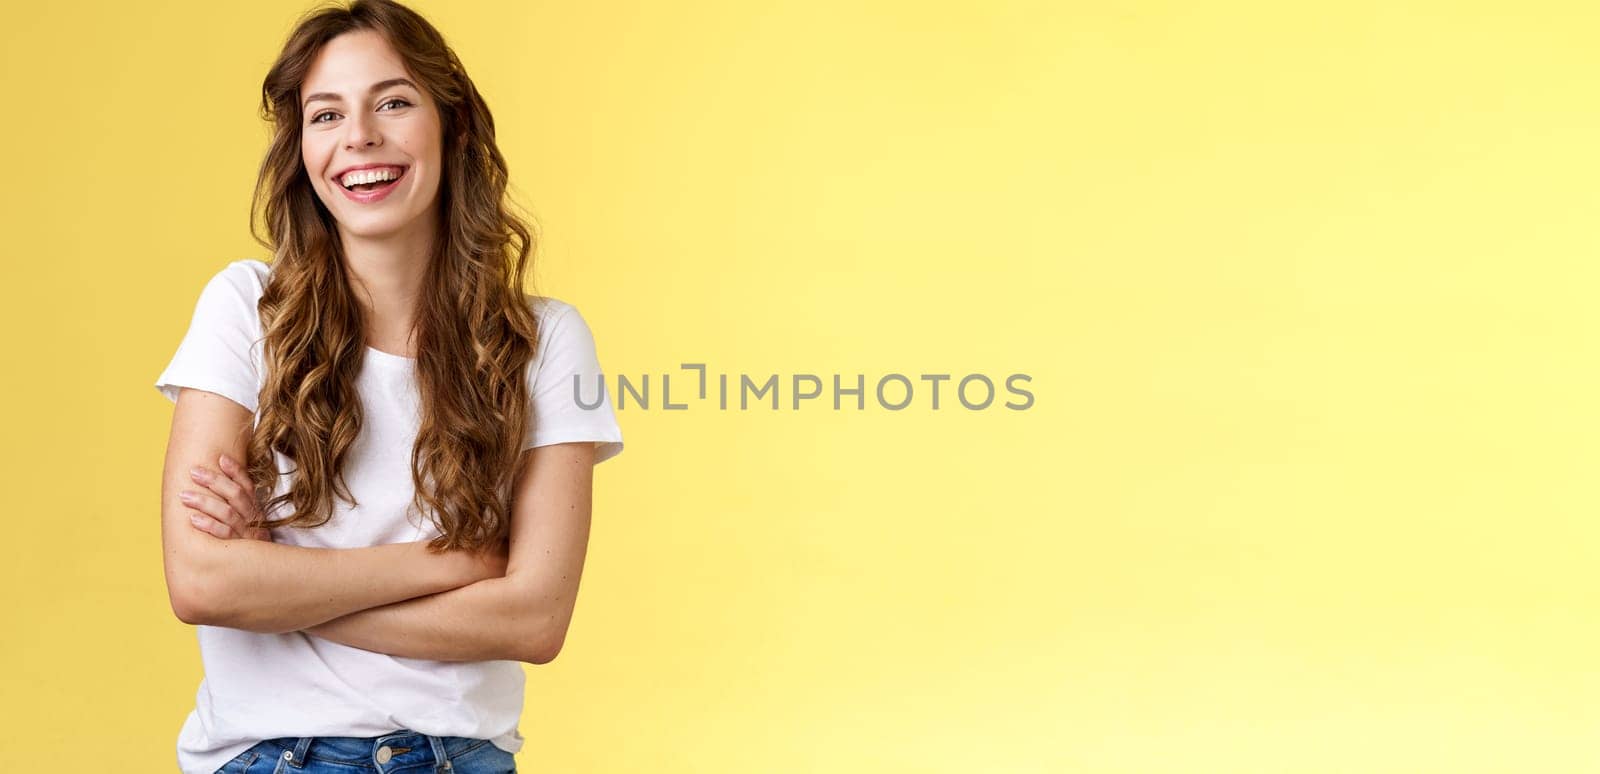 Entertain me. Friendly charismatic female long curly haircut laughing joyfully hang out friends cross arms chest feel chilly slightly cold have amusing pleasant conversation yellow background.